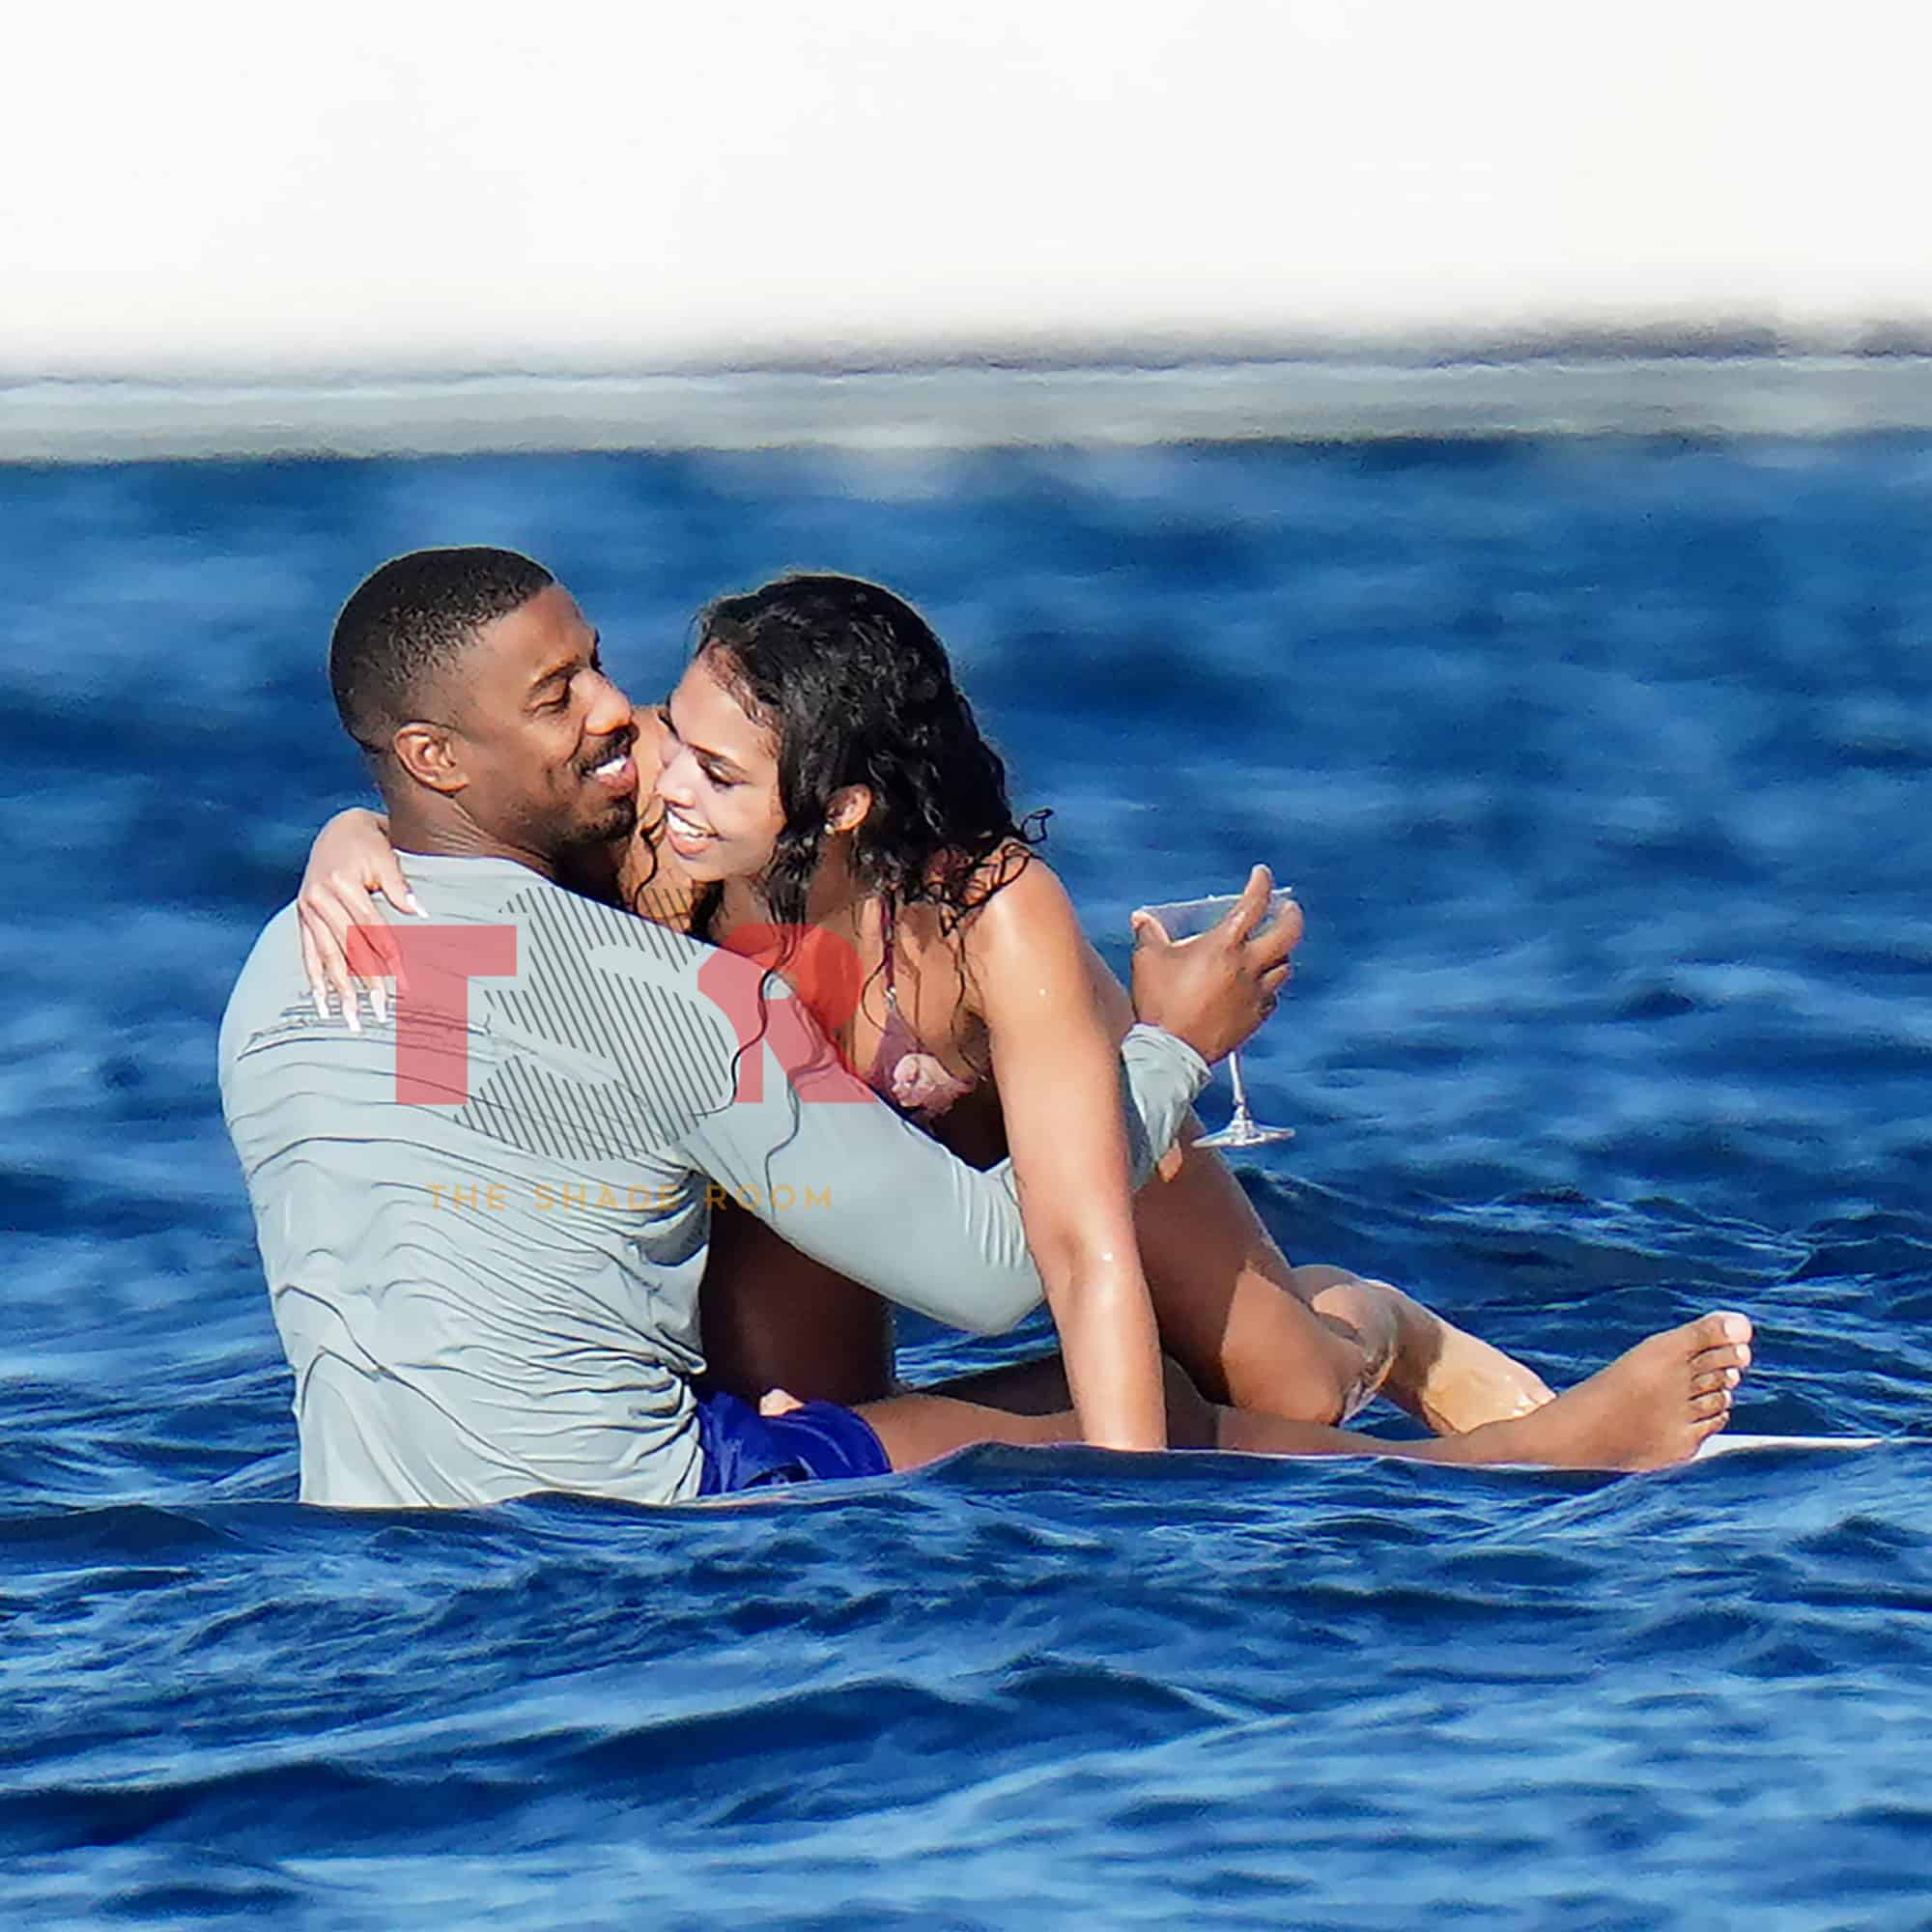 Michael B. Jordan & Lori Harvey Were Livin’ It Up While Vacationing In St. Barts Together! (Exclusive Photos)